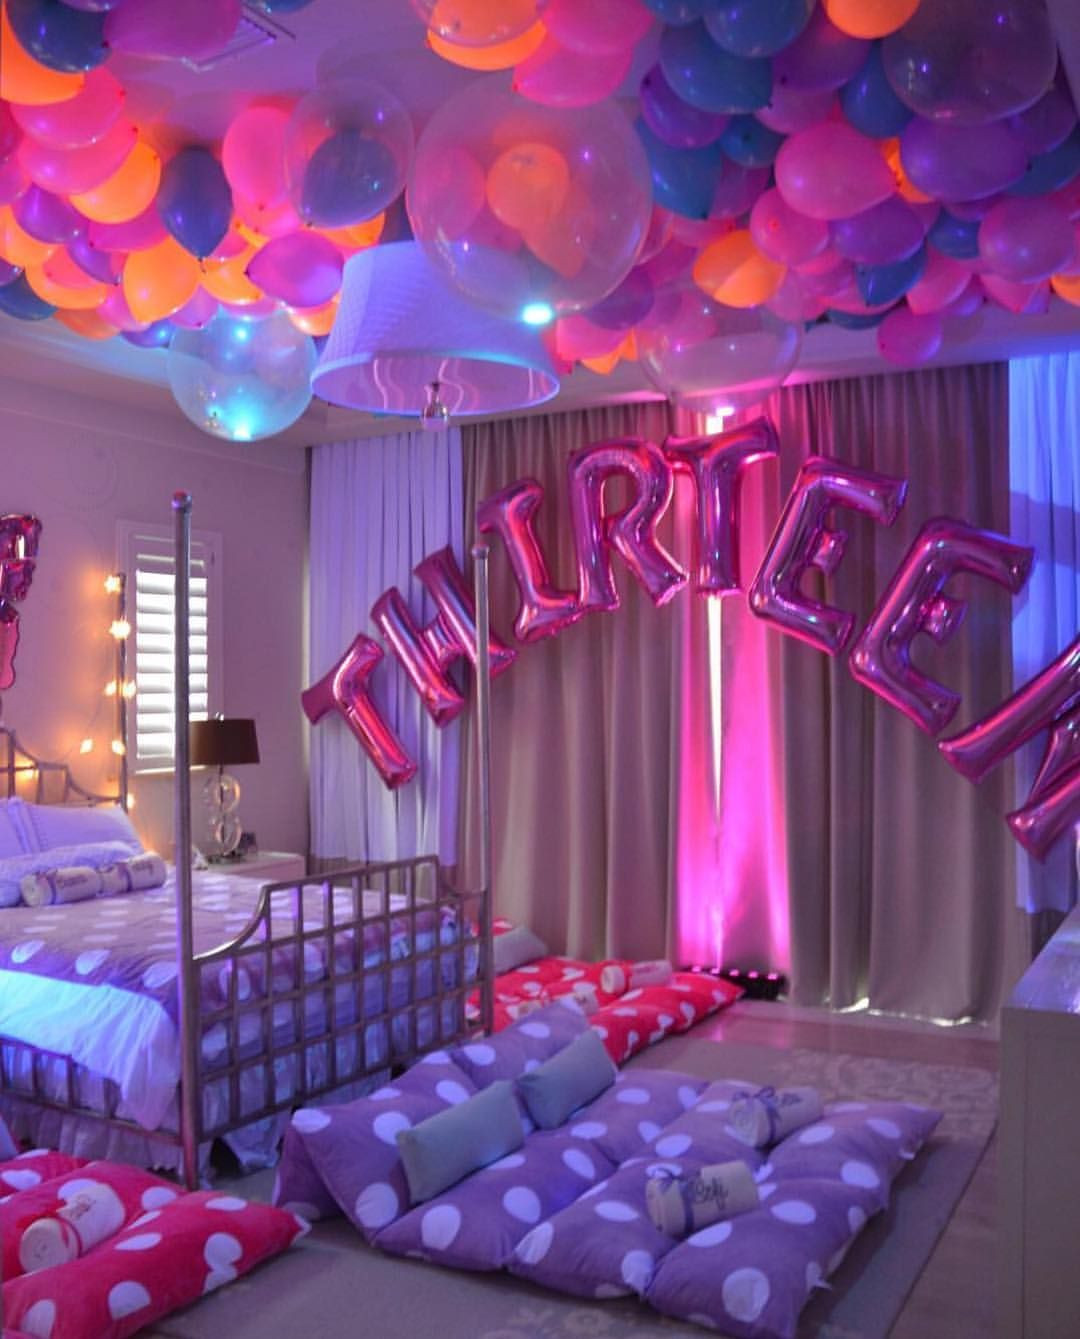 13 Birthday Party Themes
 The cutest birthday look for a 13 year old girl by Center